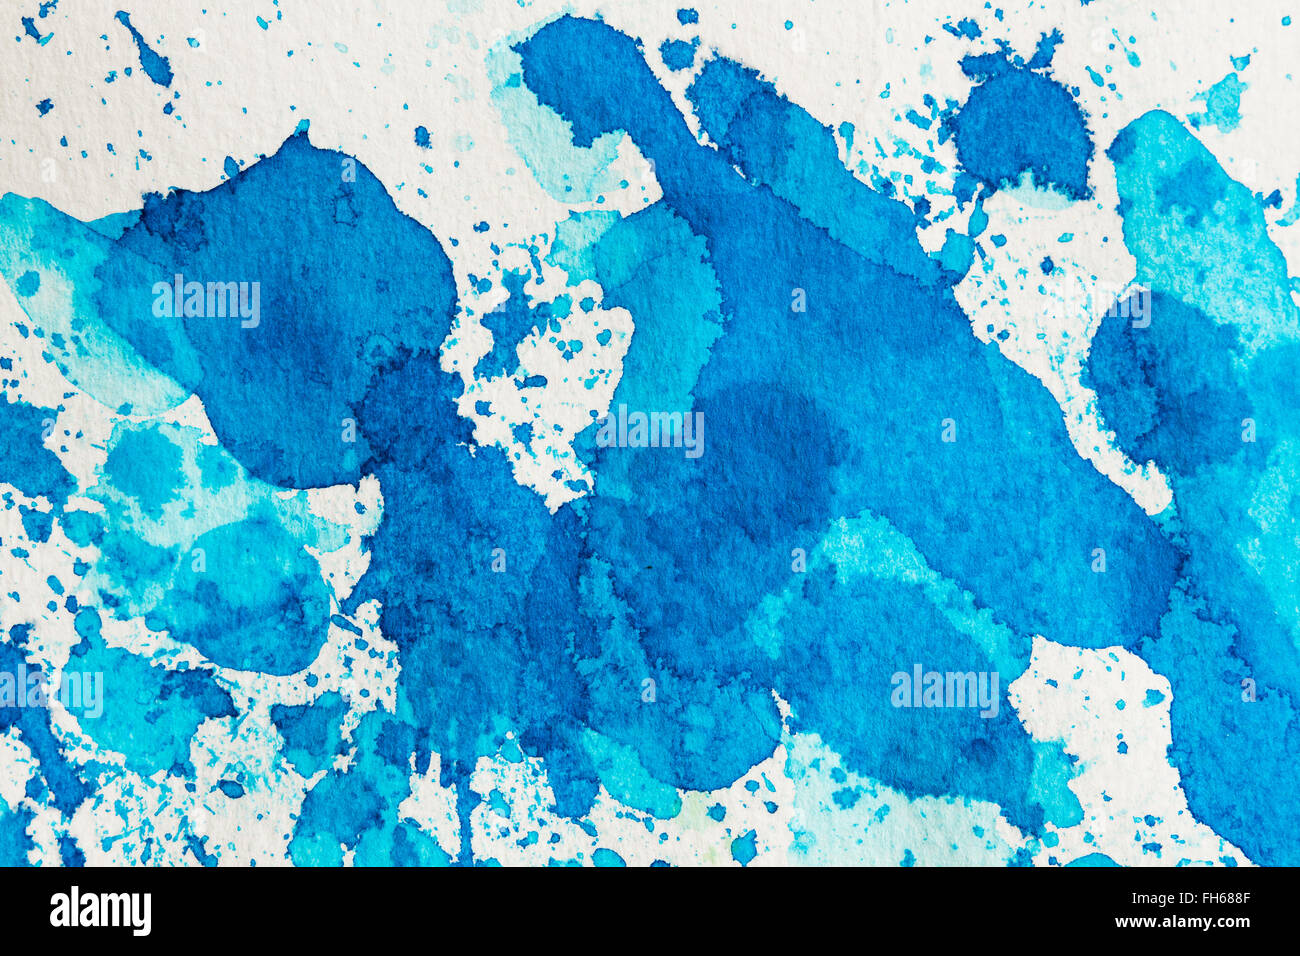 Watercolor blue abstract  with ink blots on white grainy paper. To use as  texture or background. Design element. Stock Photo